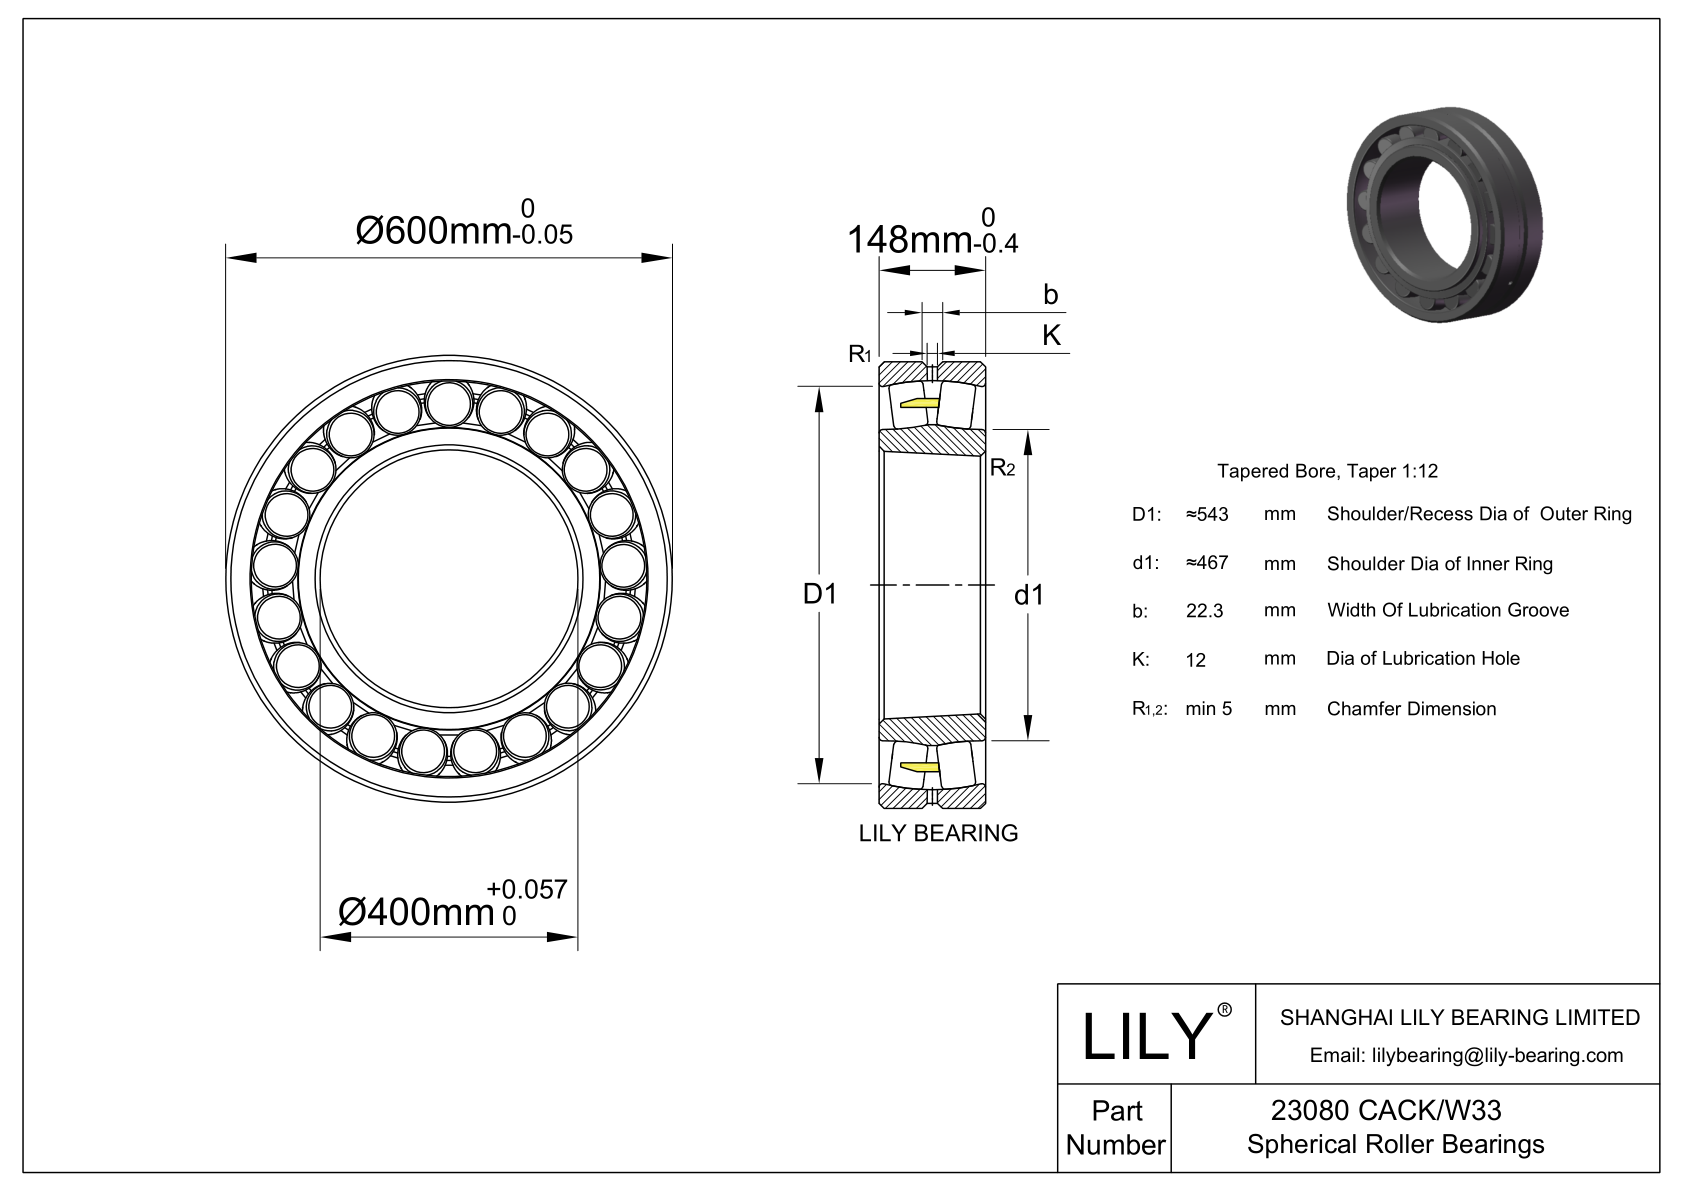 23080 CACK/W33 Double Row Spherical Roller Bearing cad drawing